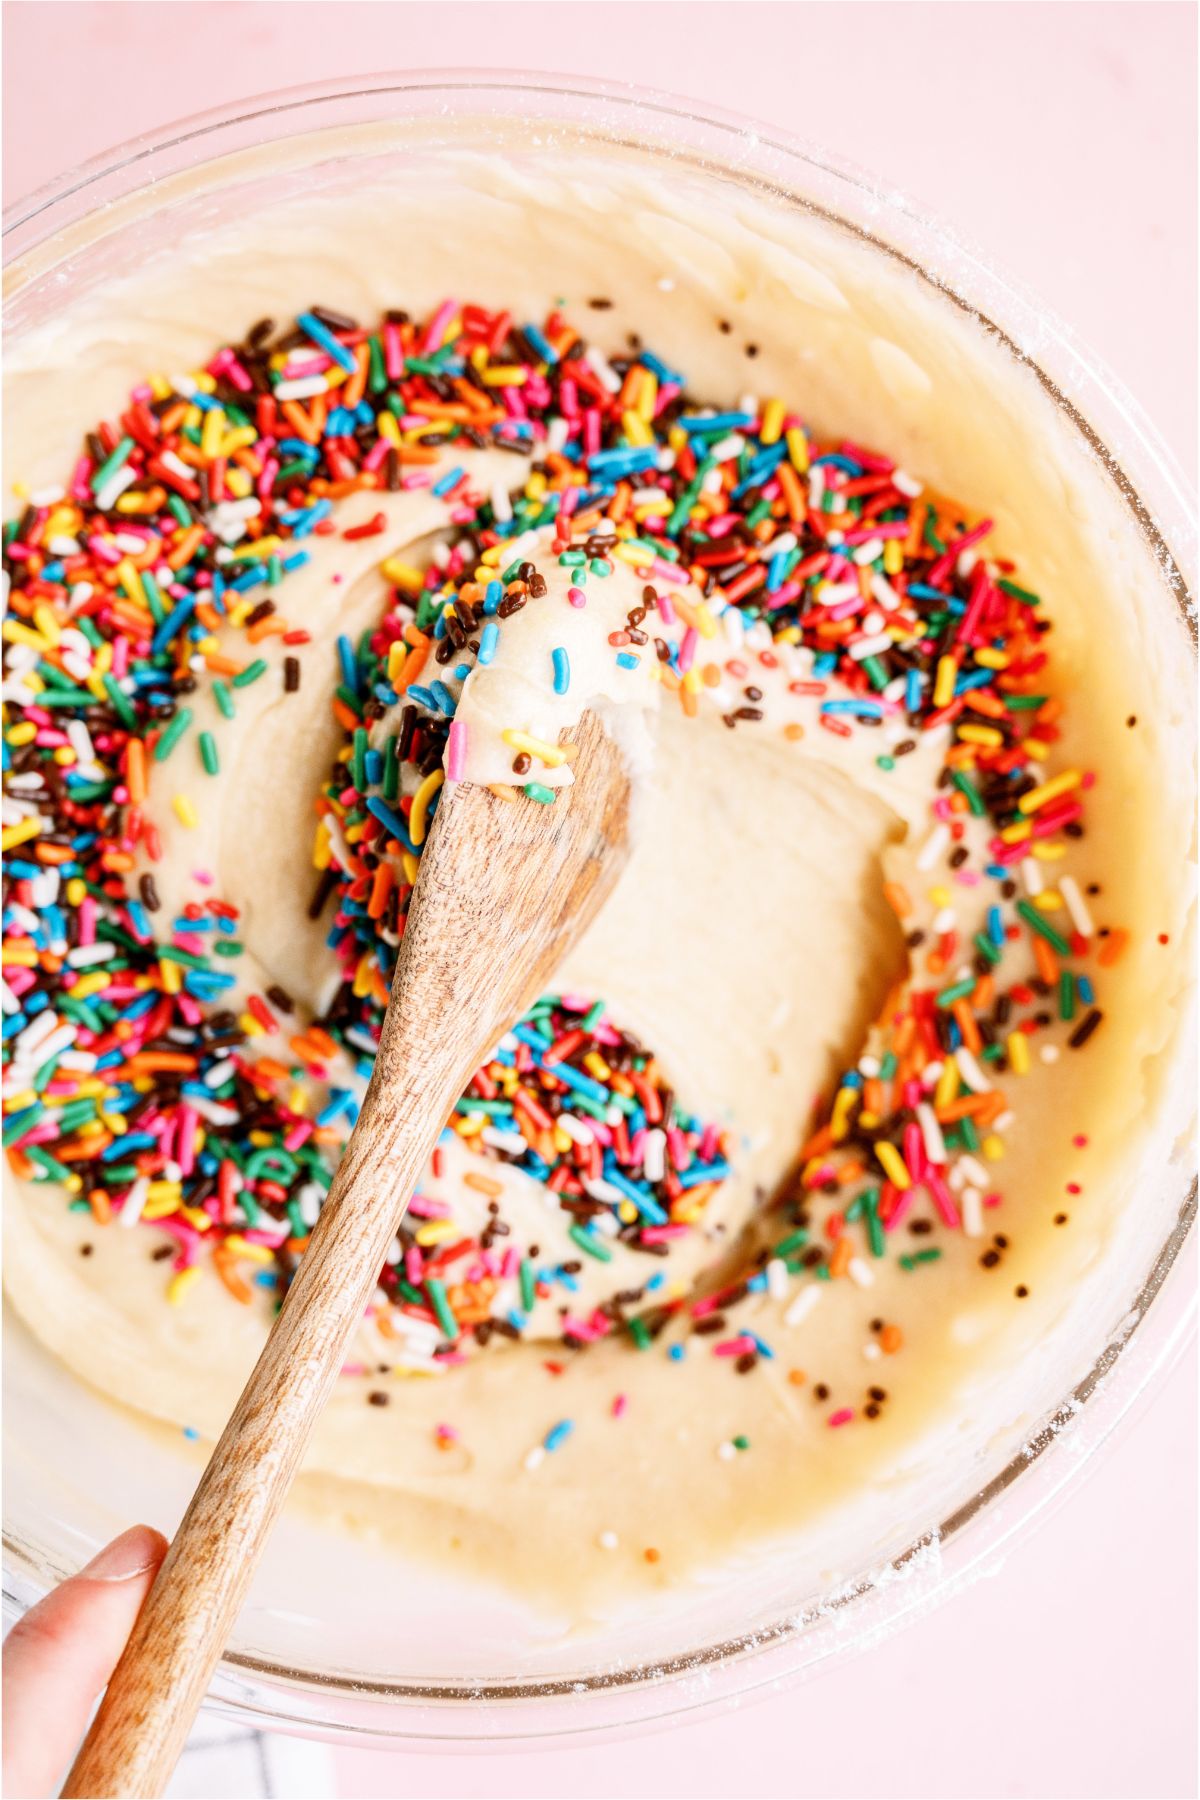 Gently mixing sprinkles into cake batter with wooden spoon